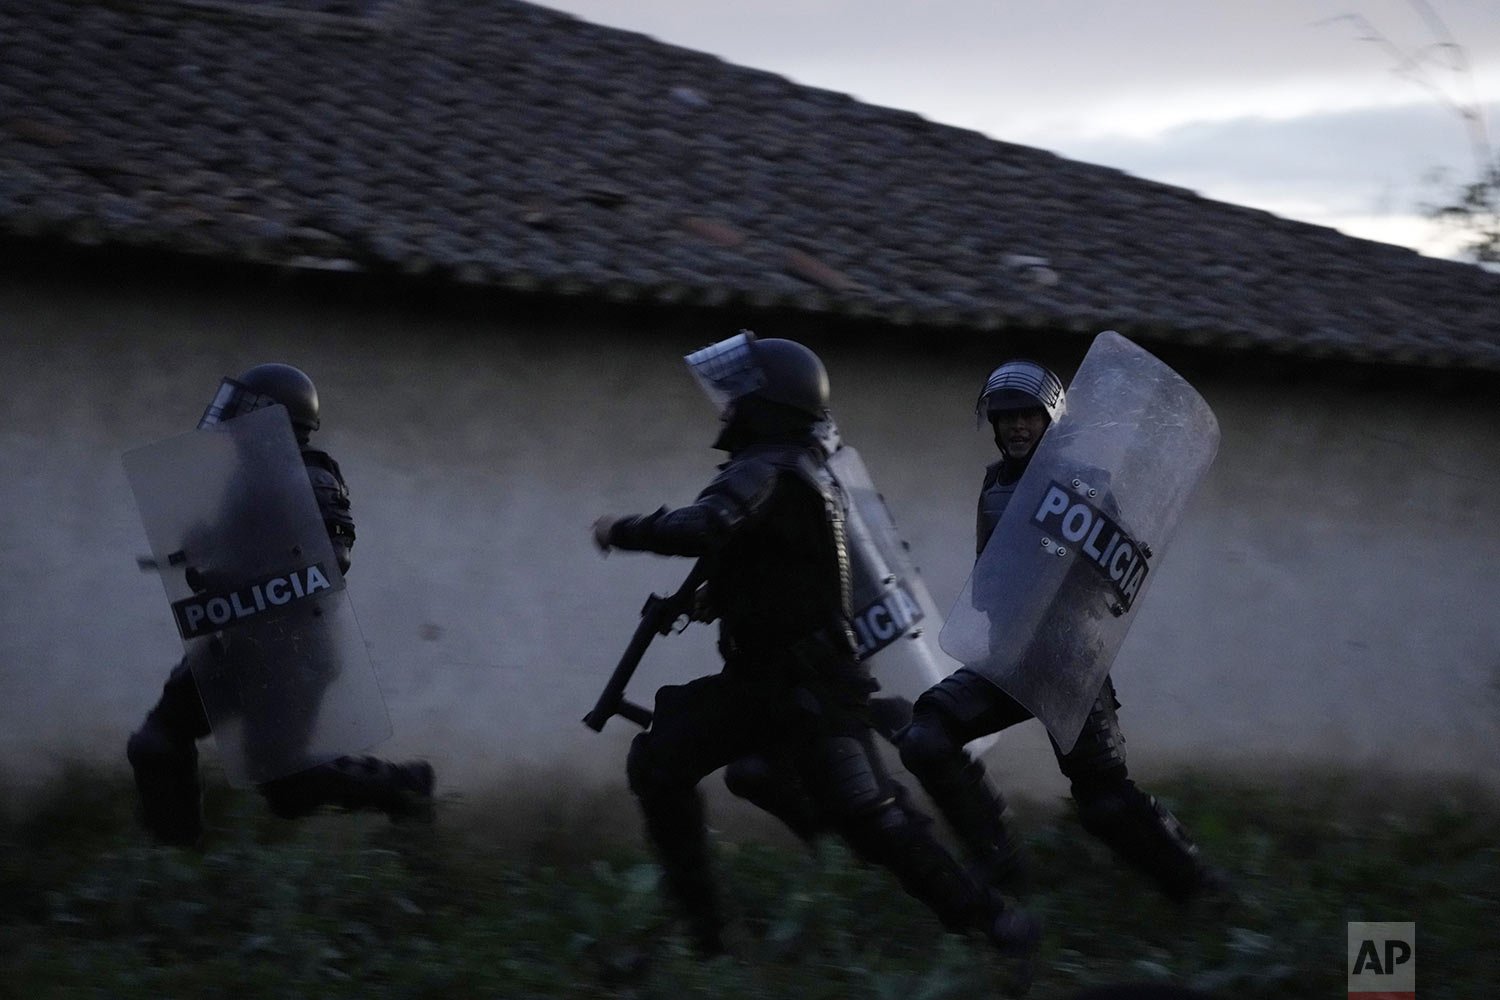  Police advance on anti-government protesters angry with the rise in gas prices in Saquisili, Ecuador, Oct. 27, 2021. (AP Photo/Dolores Ochoa) 